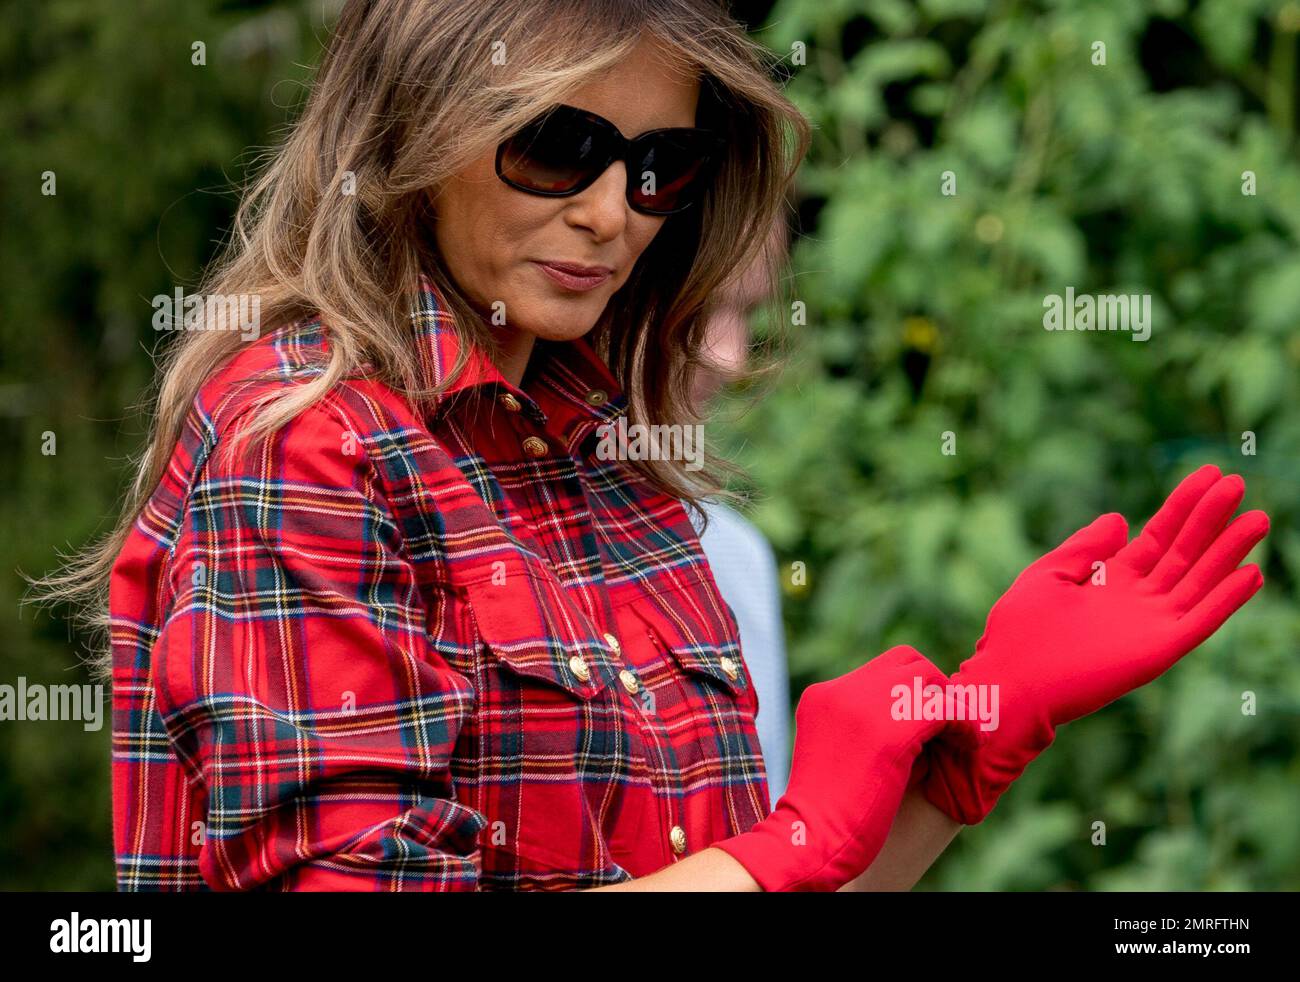 First lady Melania Trump puts on gloves as she participates in an  harvesting and planting event with the Boys and Girls Club of Washington in  the White House Kitchen Garden on the